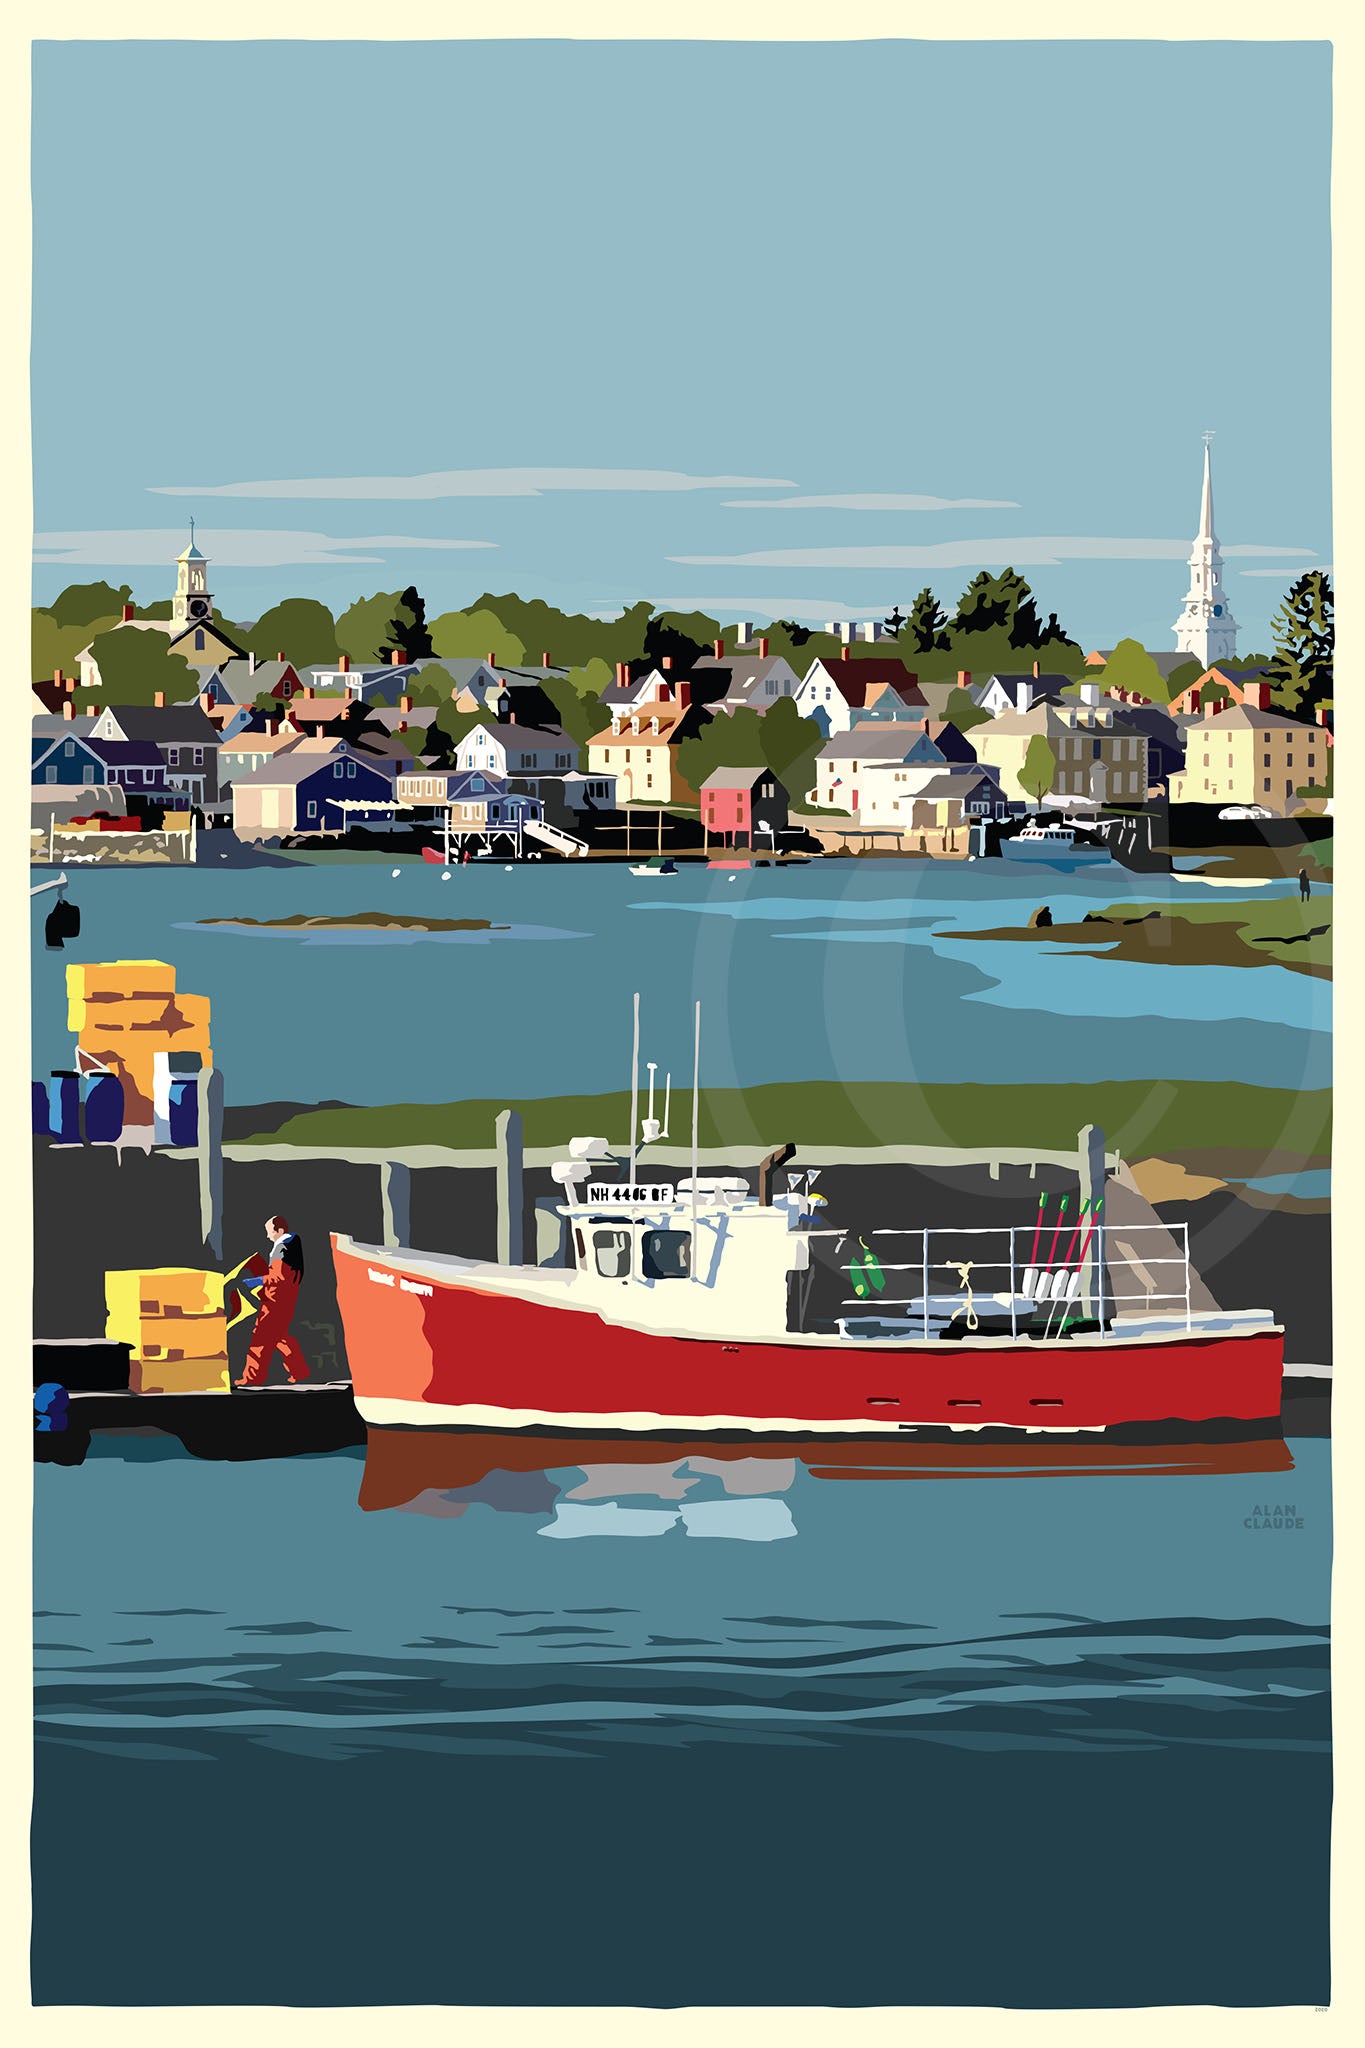 Red Lobster Boat Art Print 24" x 36" Wall Poster By Alan Claude - New Hampshire